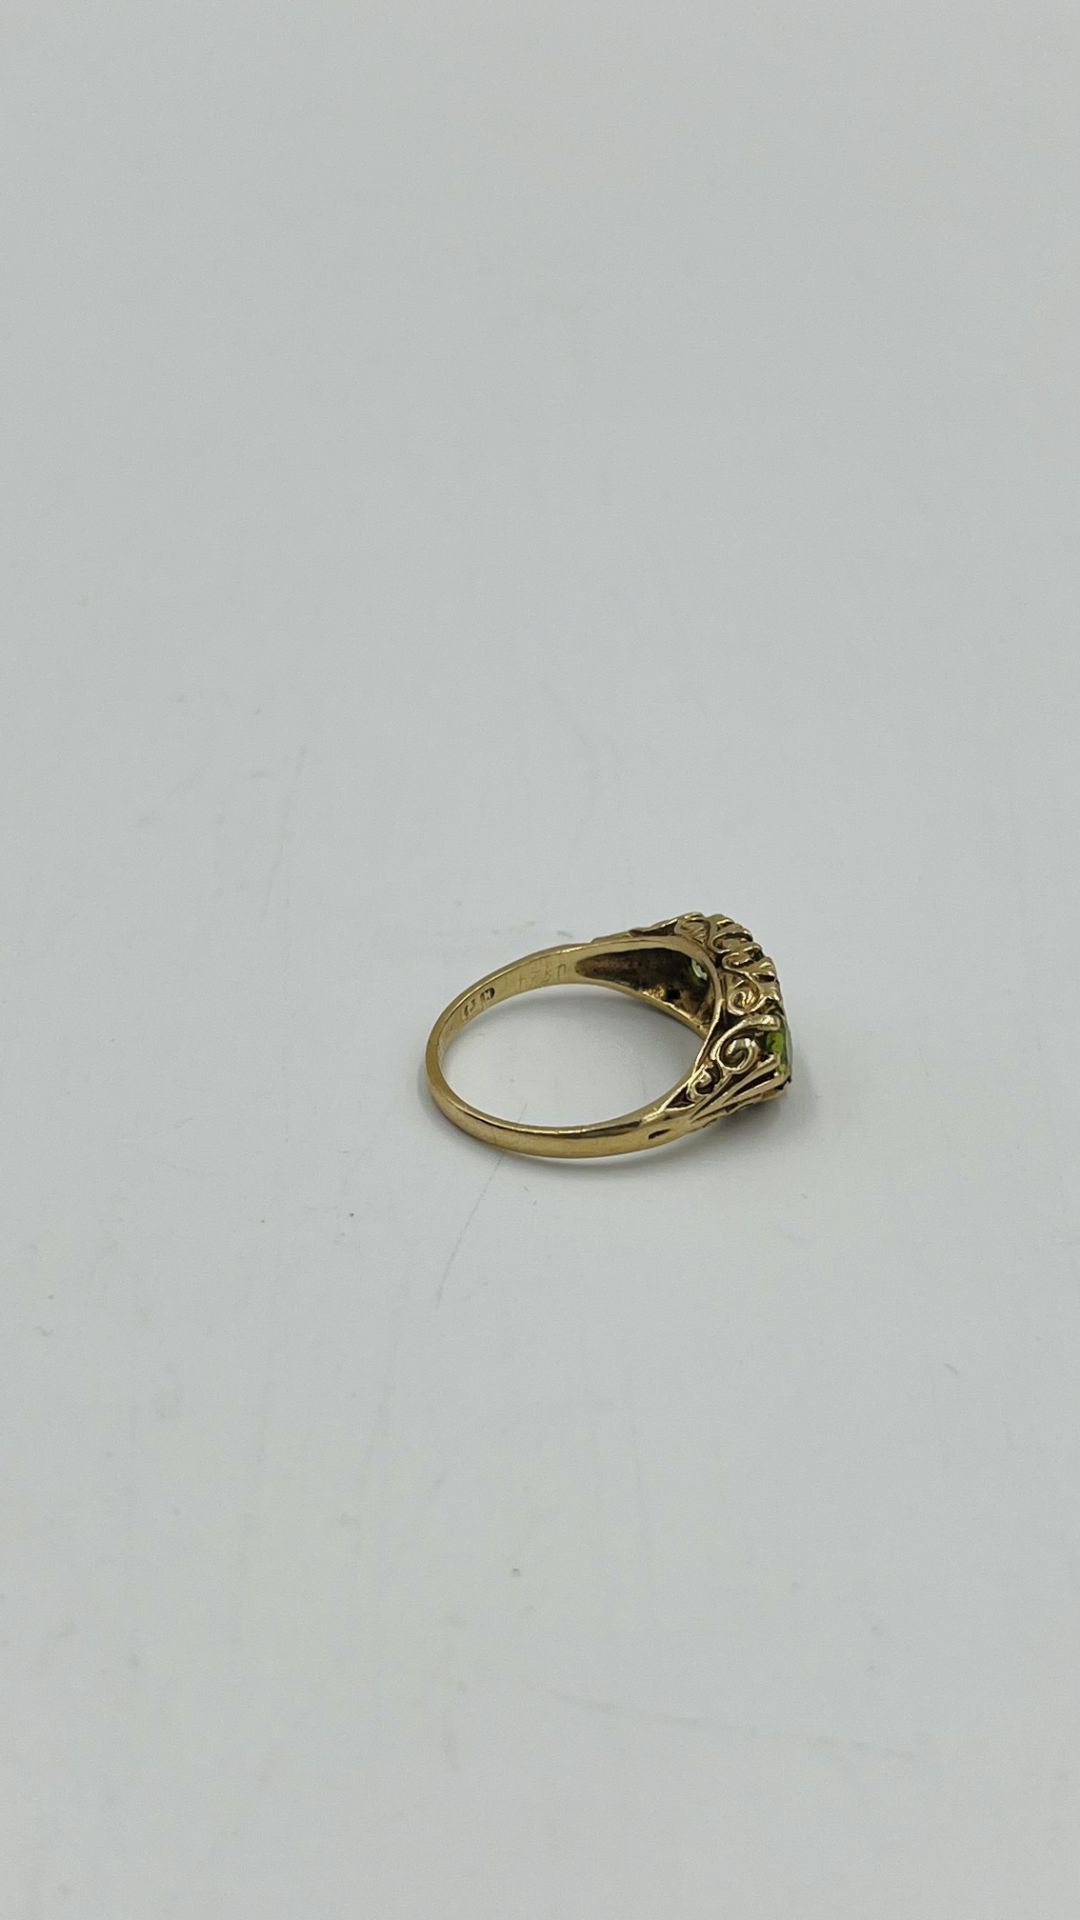 9ct gold ring set with a green stone - Image 3 of 4